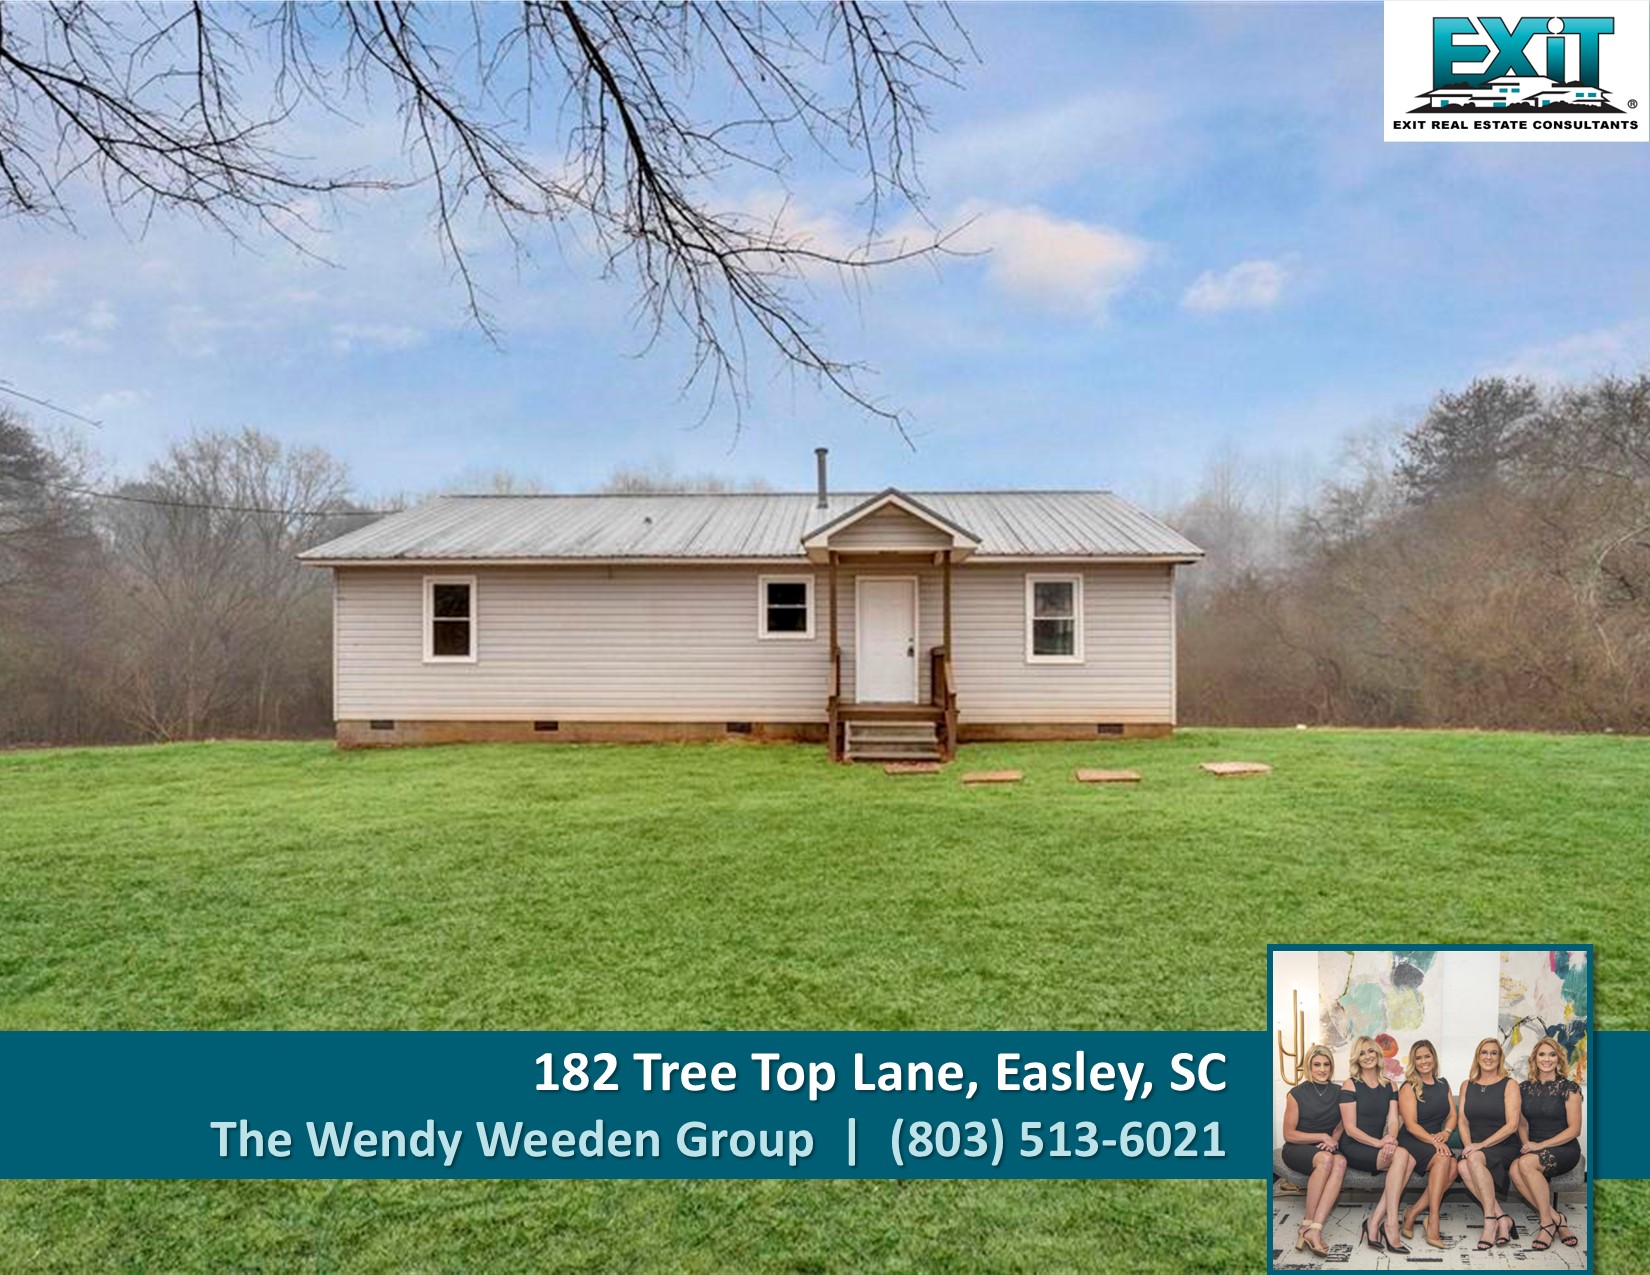 Just listed in Easley